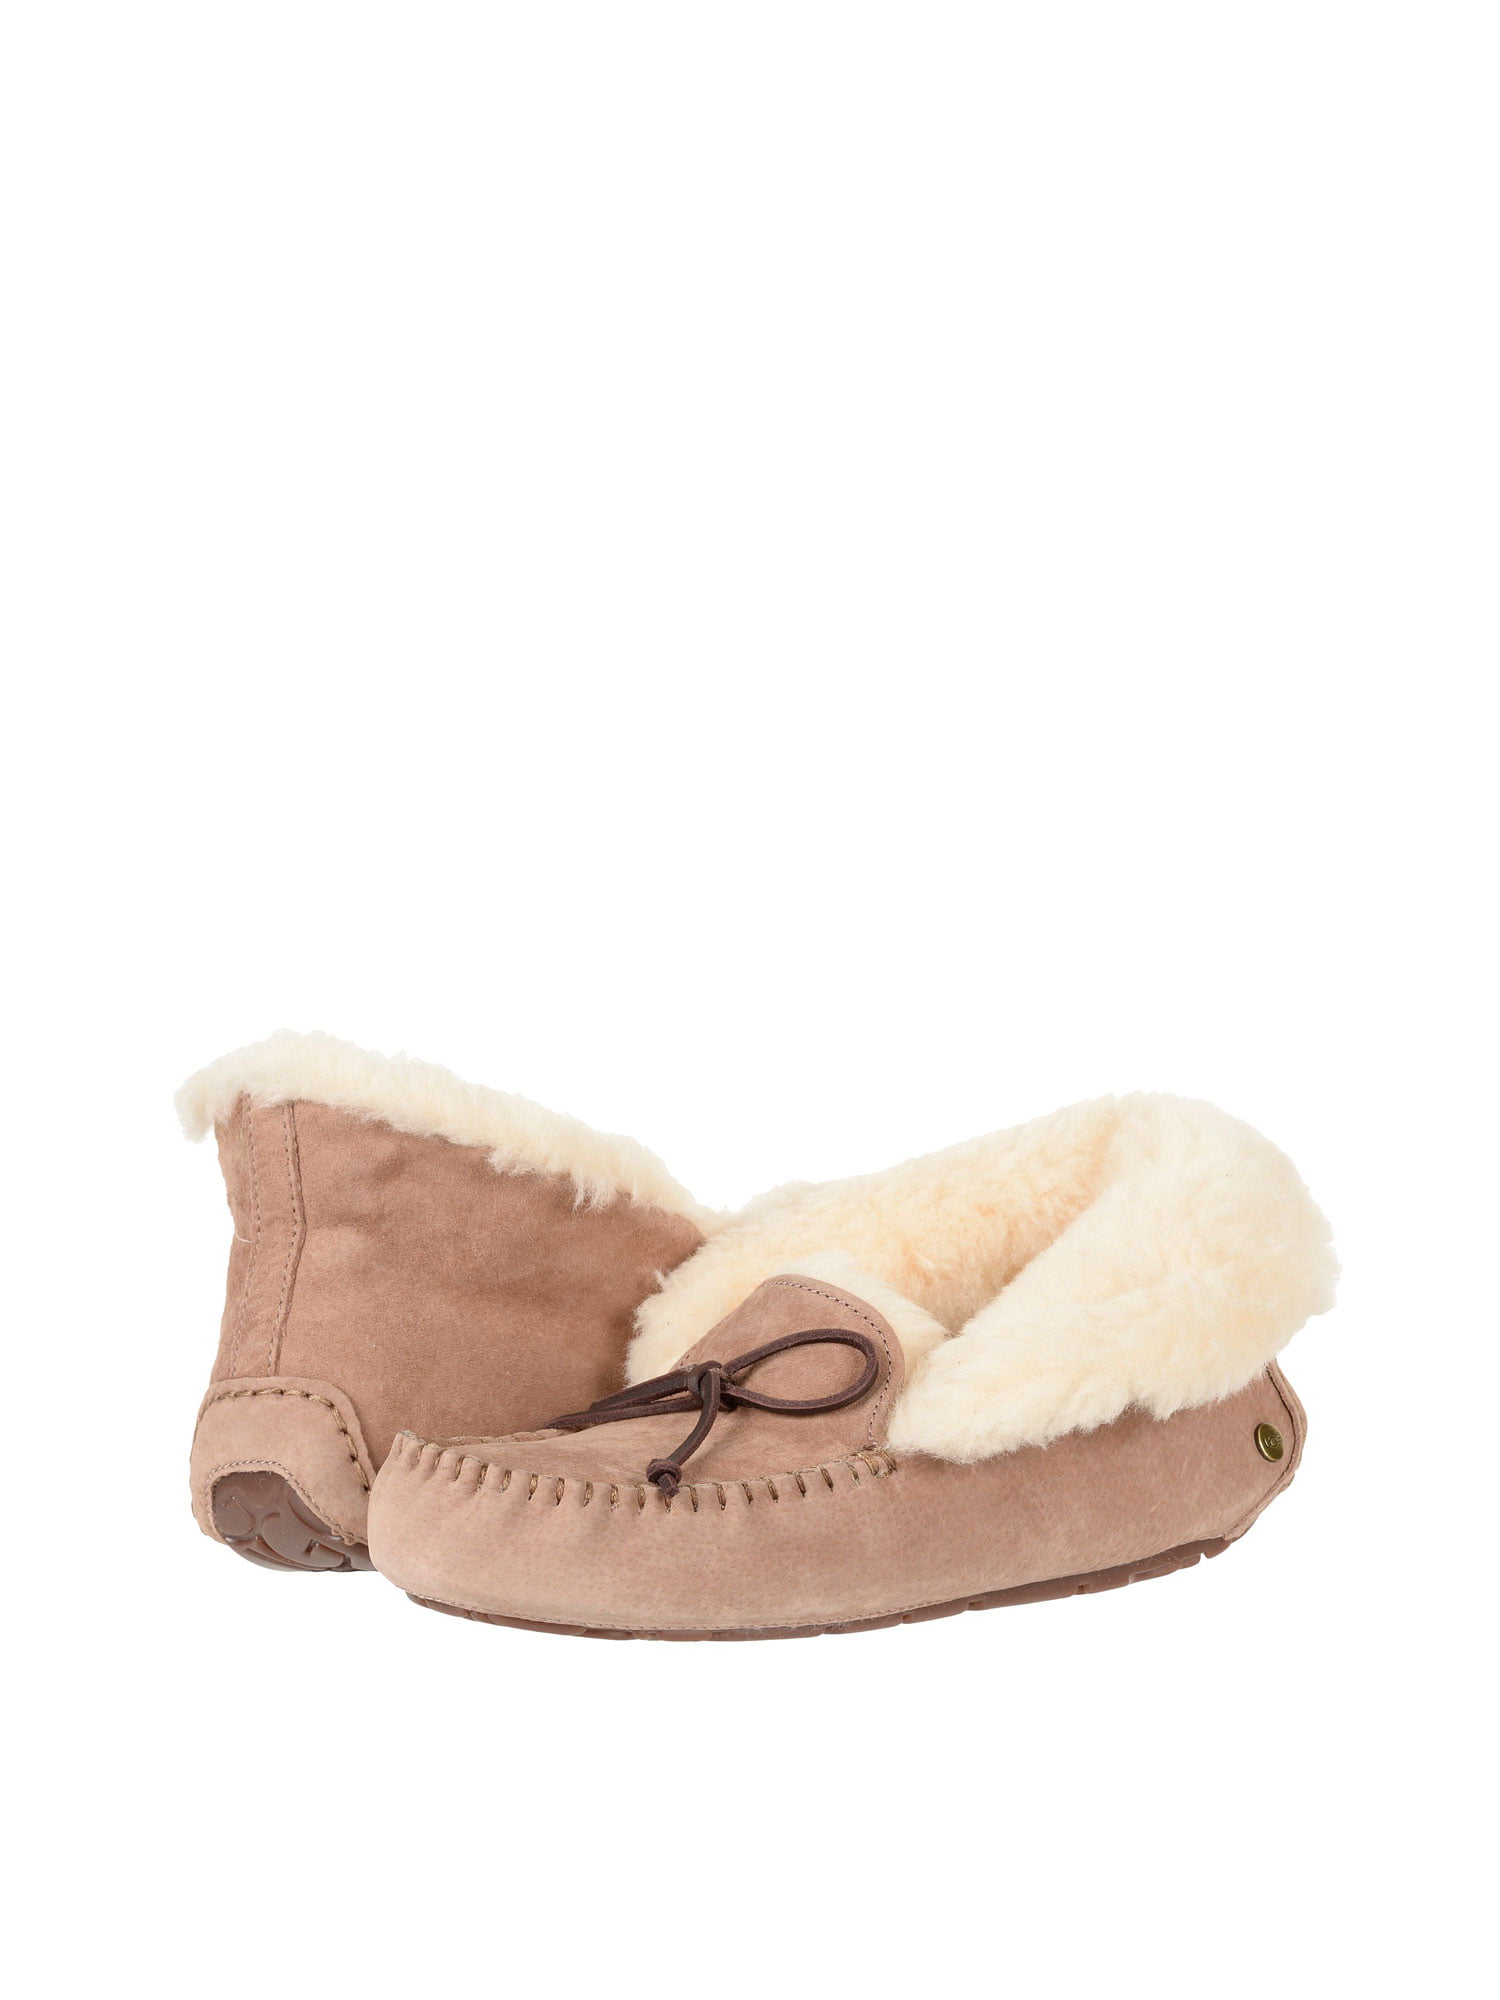 Suede Moccasin Slippers 1004806 